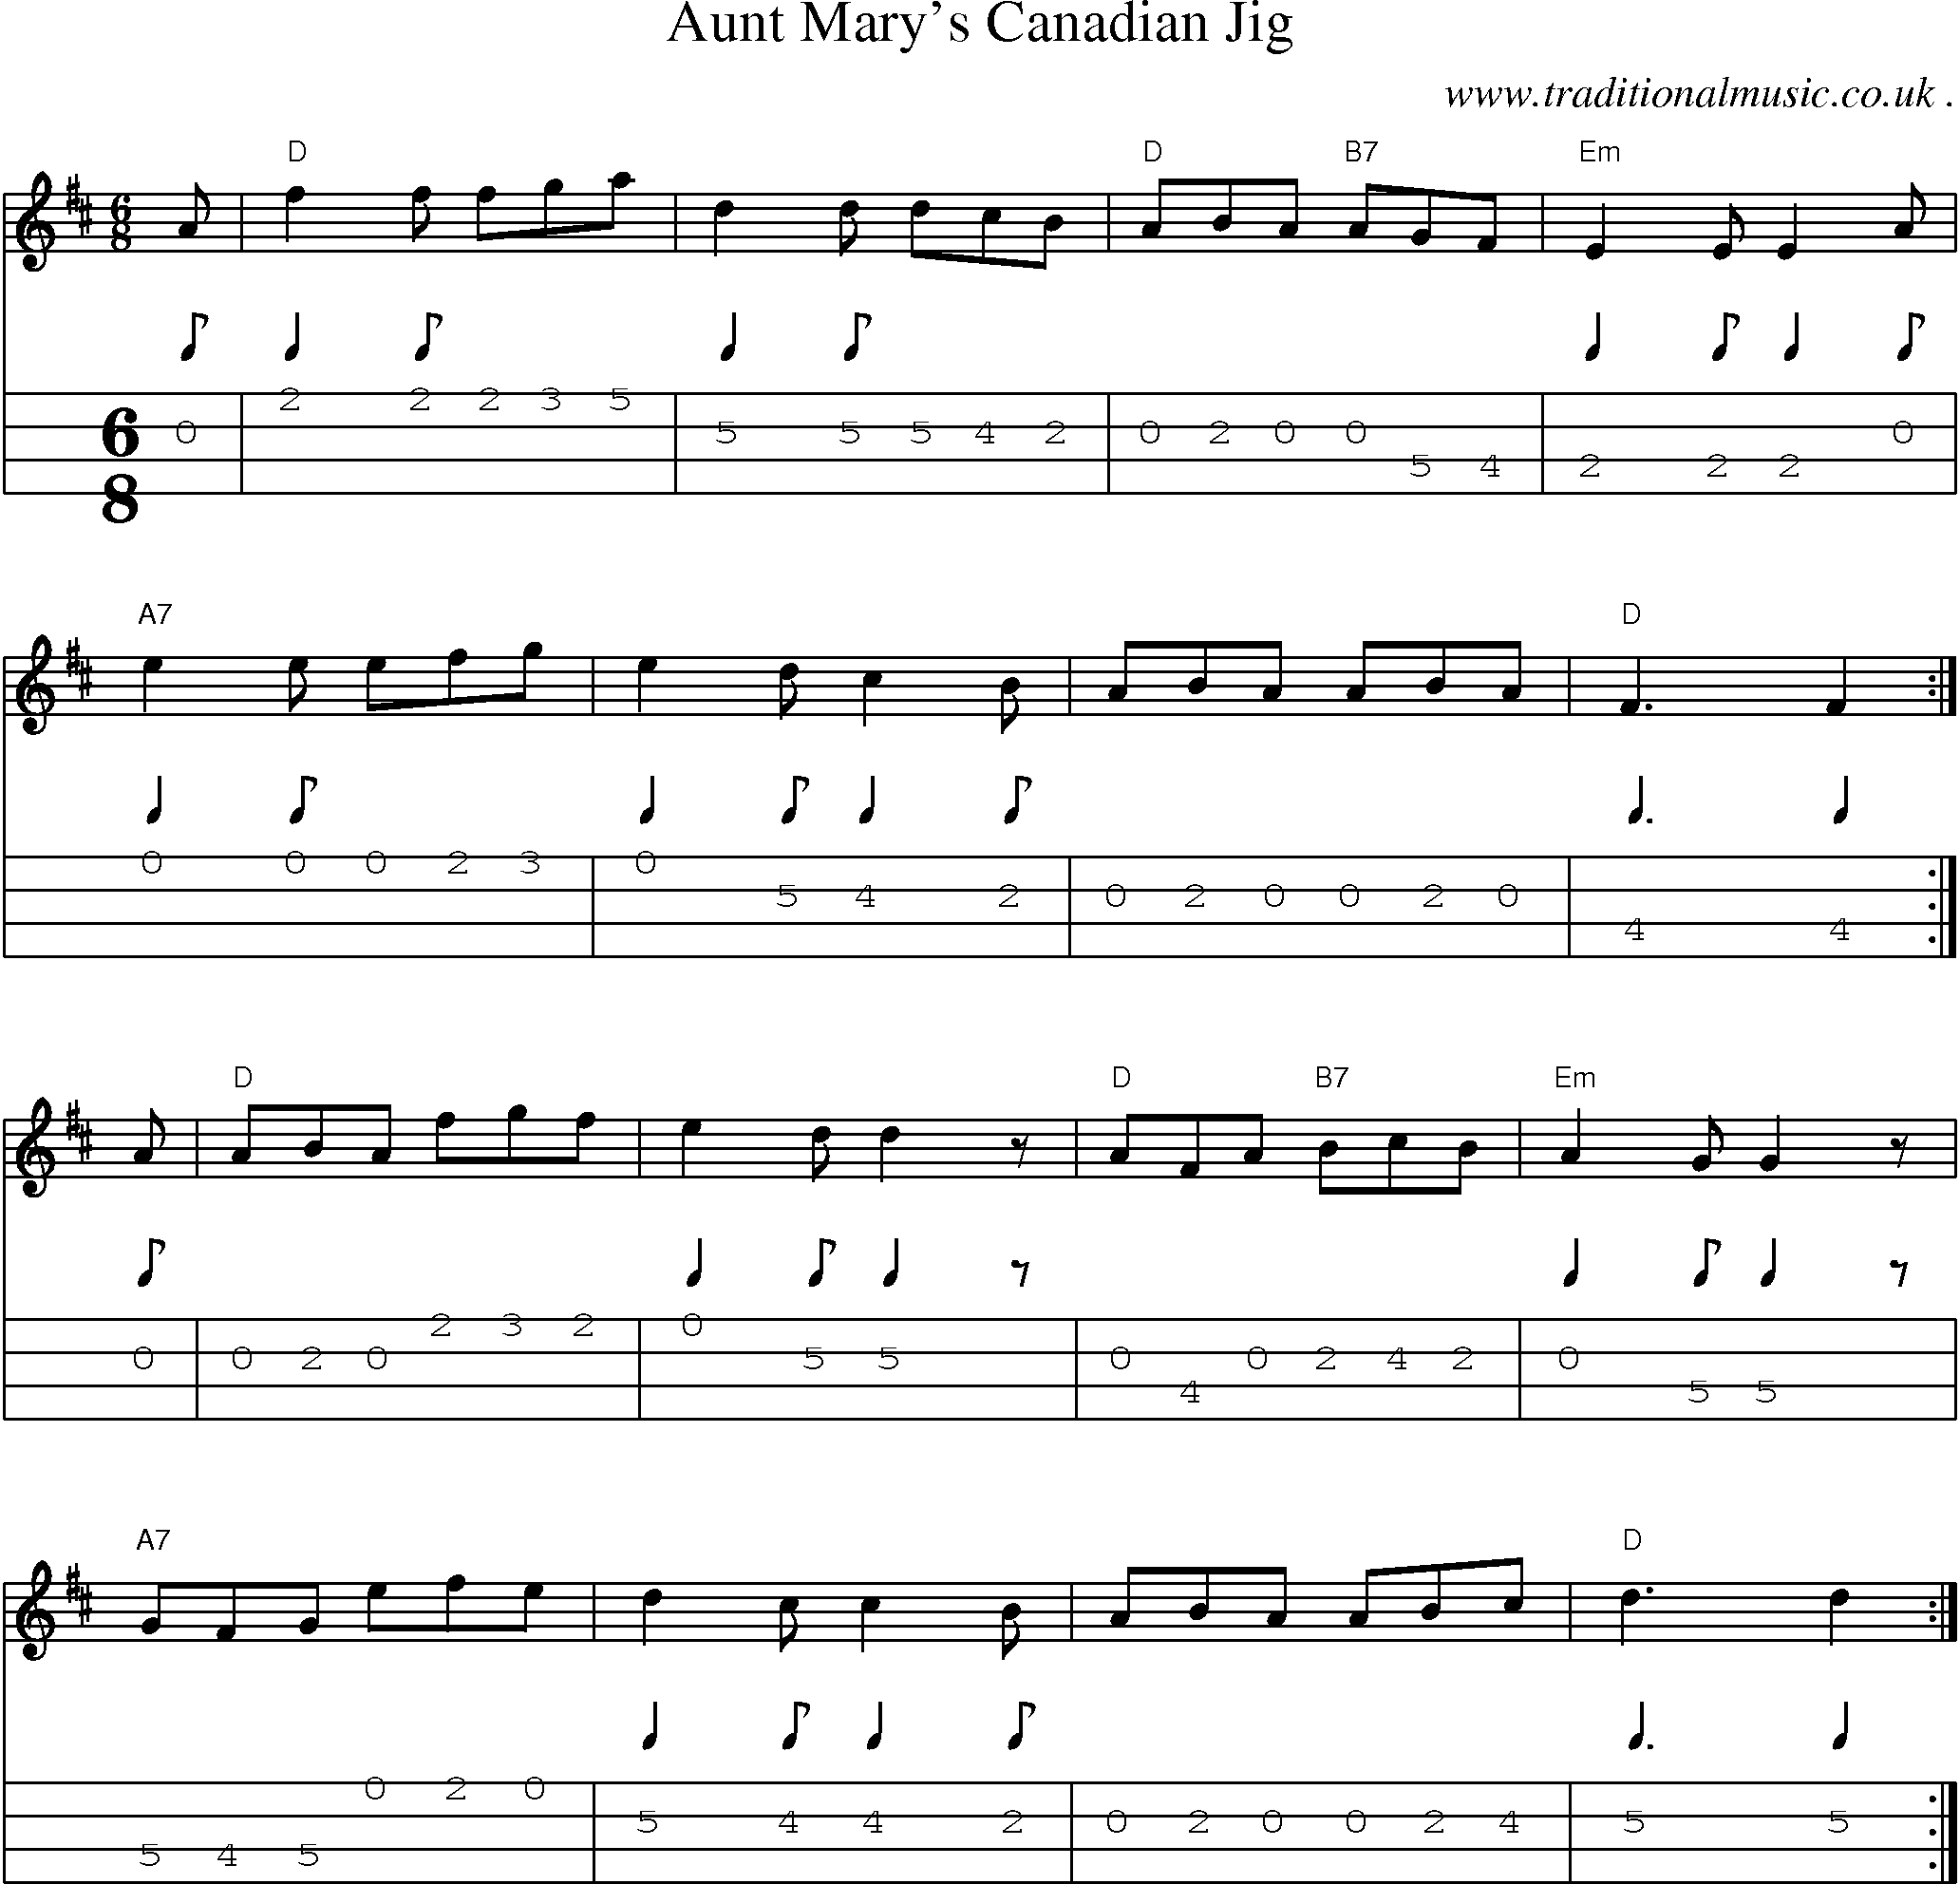 Music Score and Guitar Tabs for Aunt Marys Canadian Jig